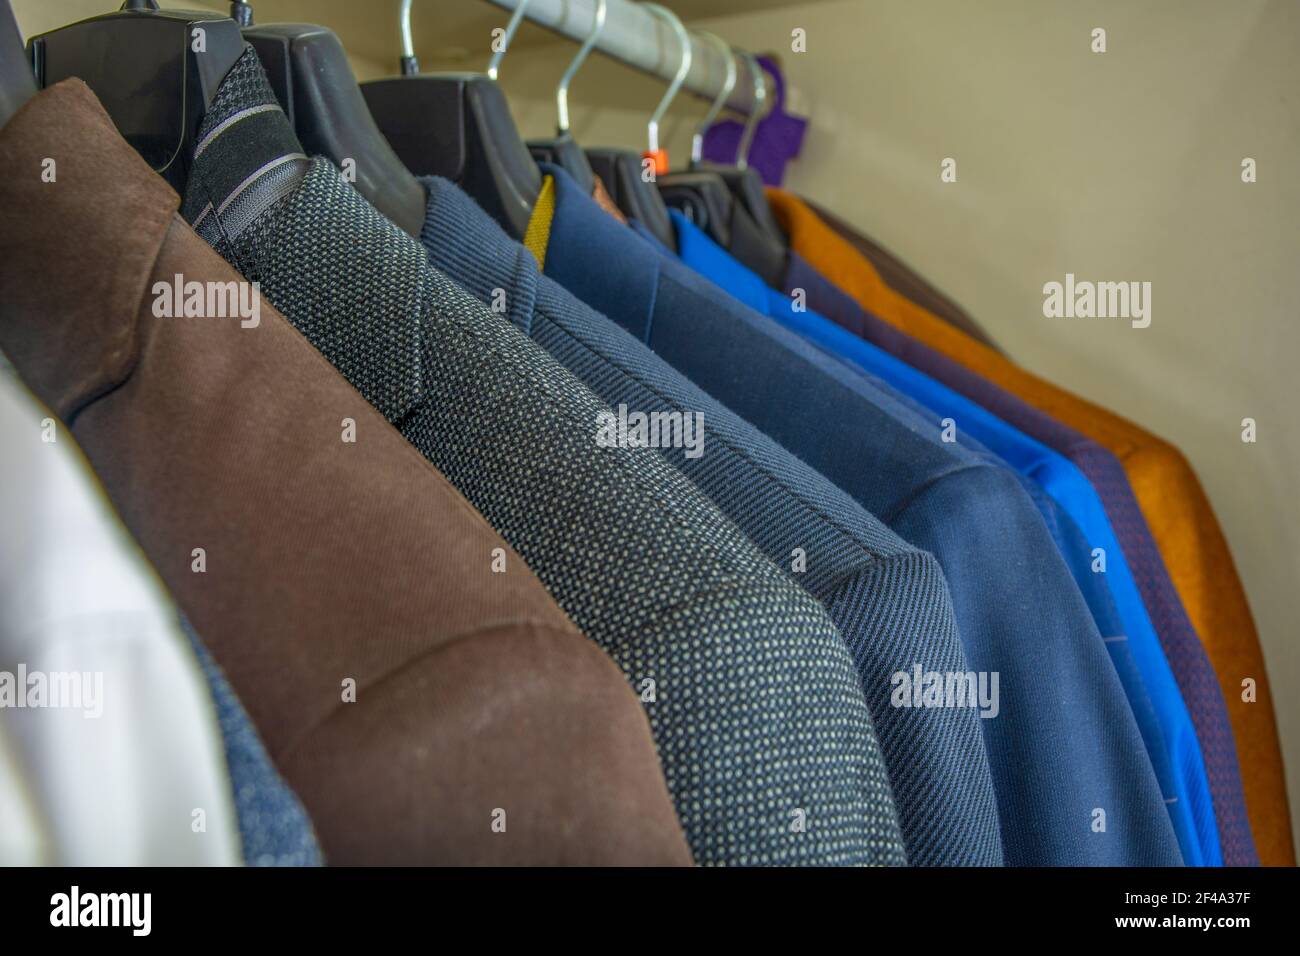 Wardrobe with suits of different colors in close-up Stock Photo